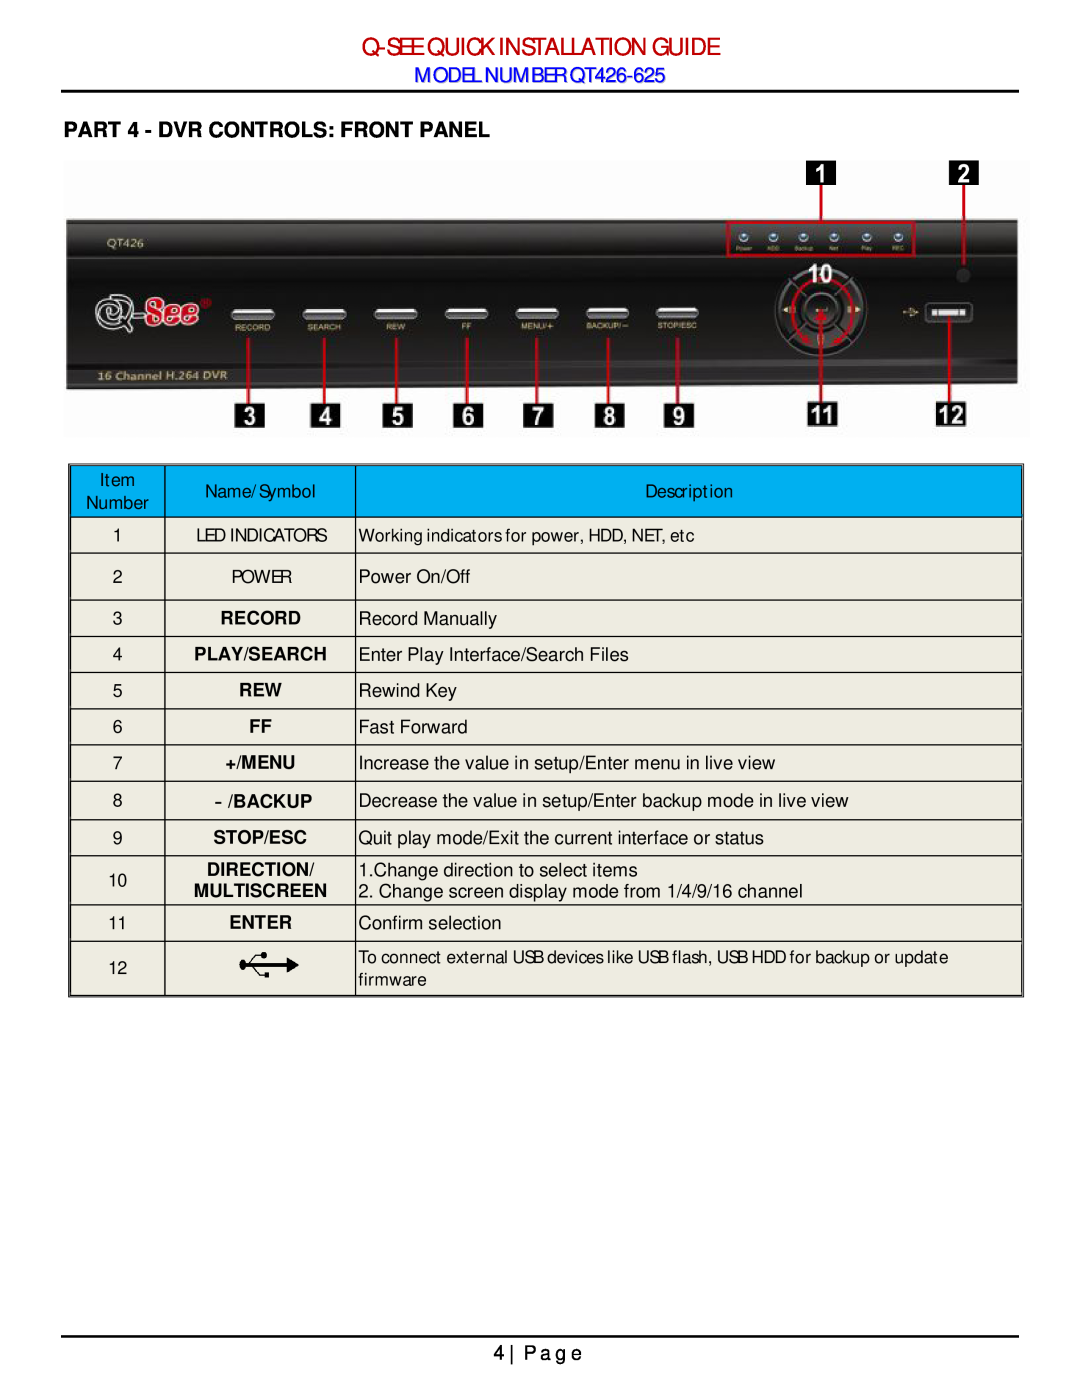 Q-See manual Q-Seequick Installation Guide, MODEL NUMBER QT426-625, PART 4 - DVR CONTROLS FRONT PANEL, P a g e 